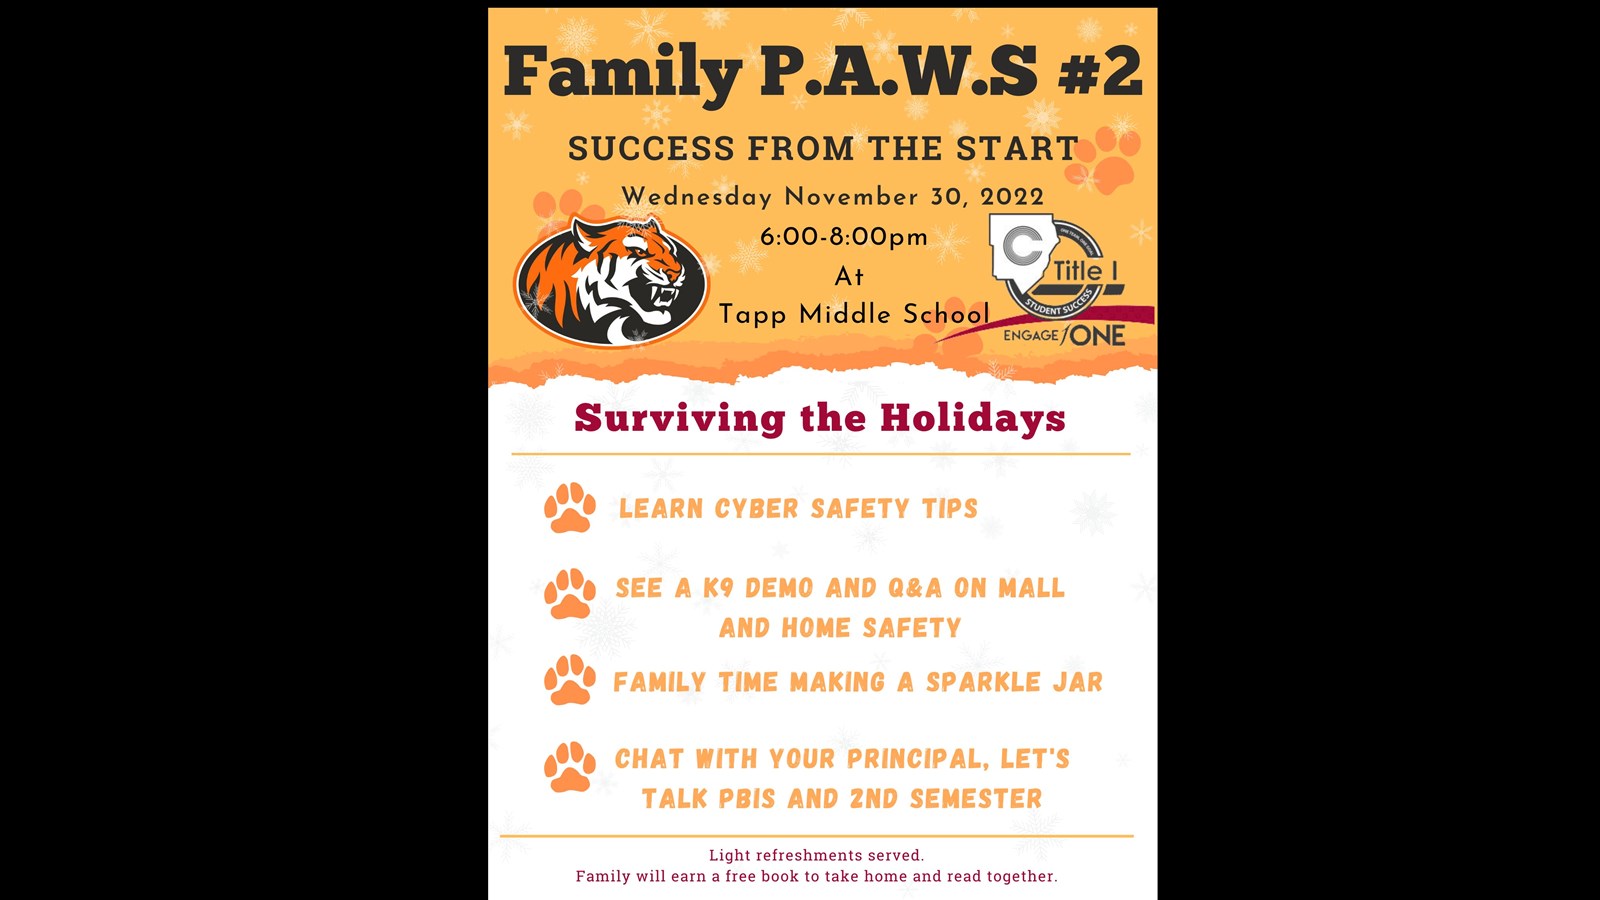 Join us for Family PAWS #2 Surviving the Holiday